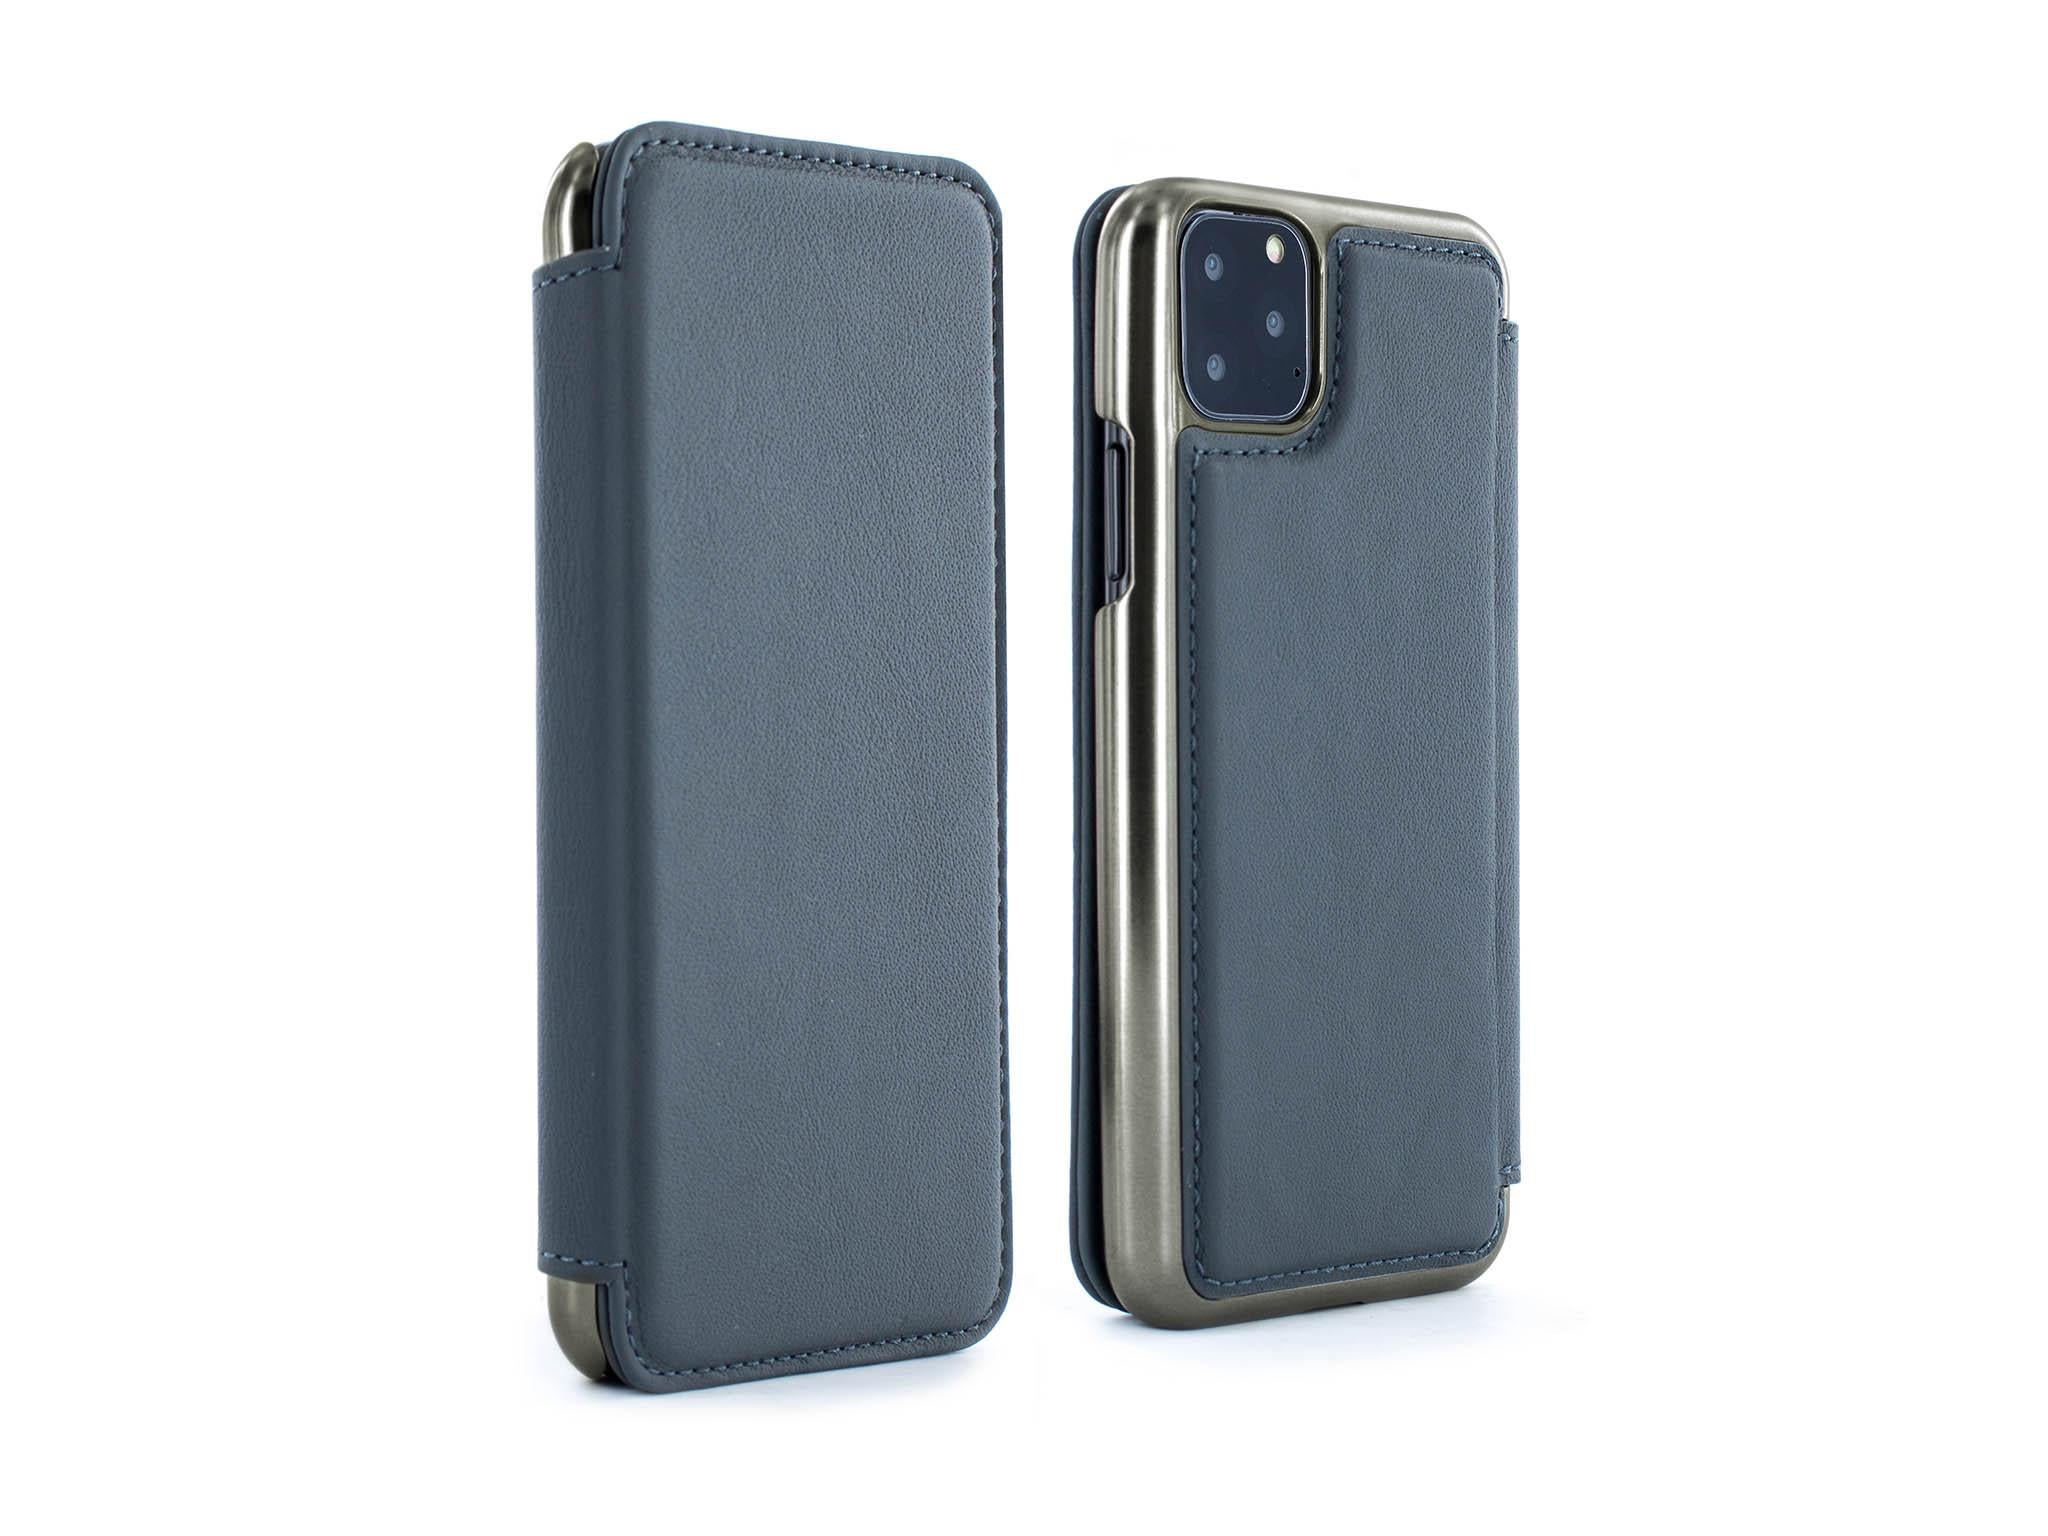 Night Leather Flip Case Wallet for iPhone 11 Pro Max Stylish Cover Compatible with iPhone 11 Pro Max 